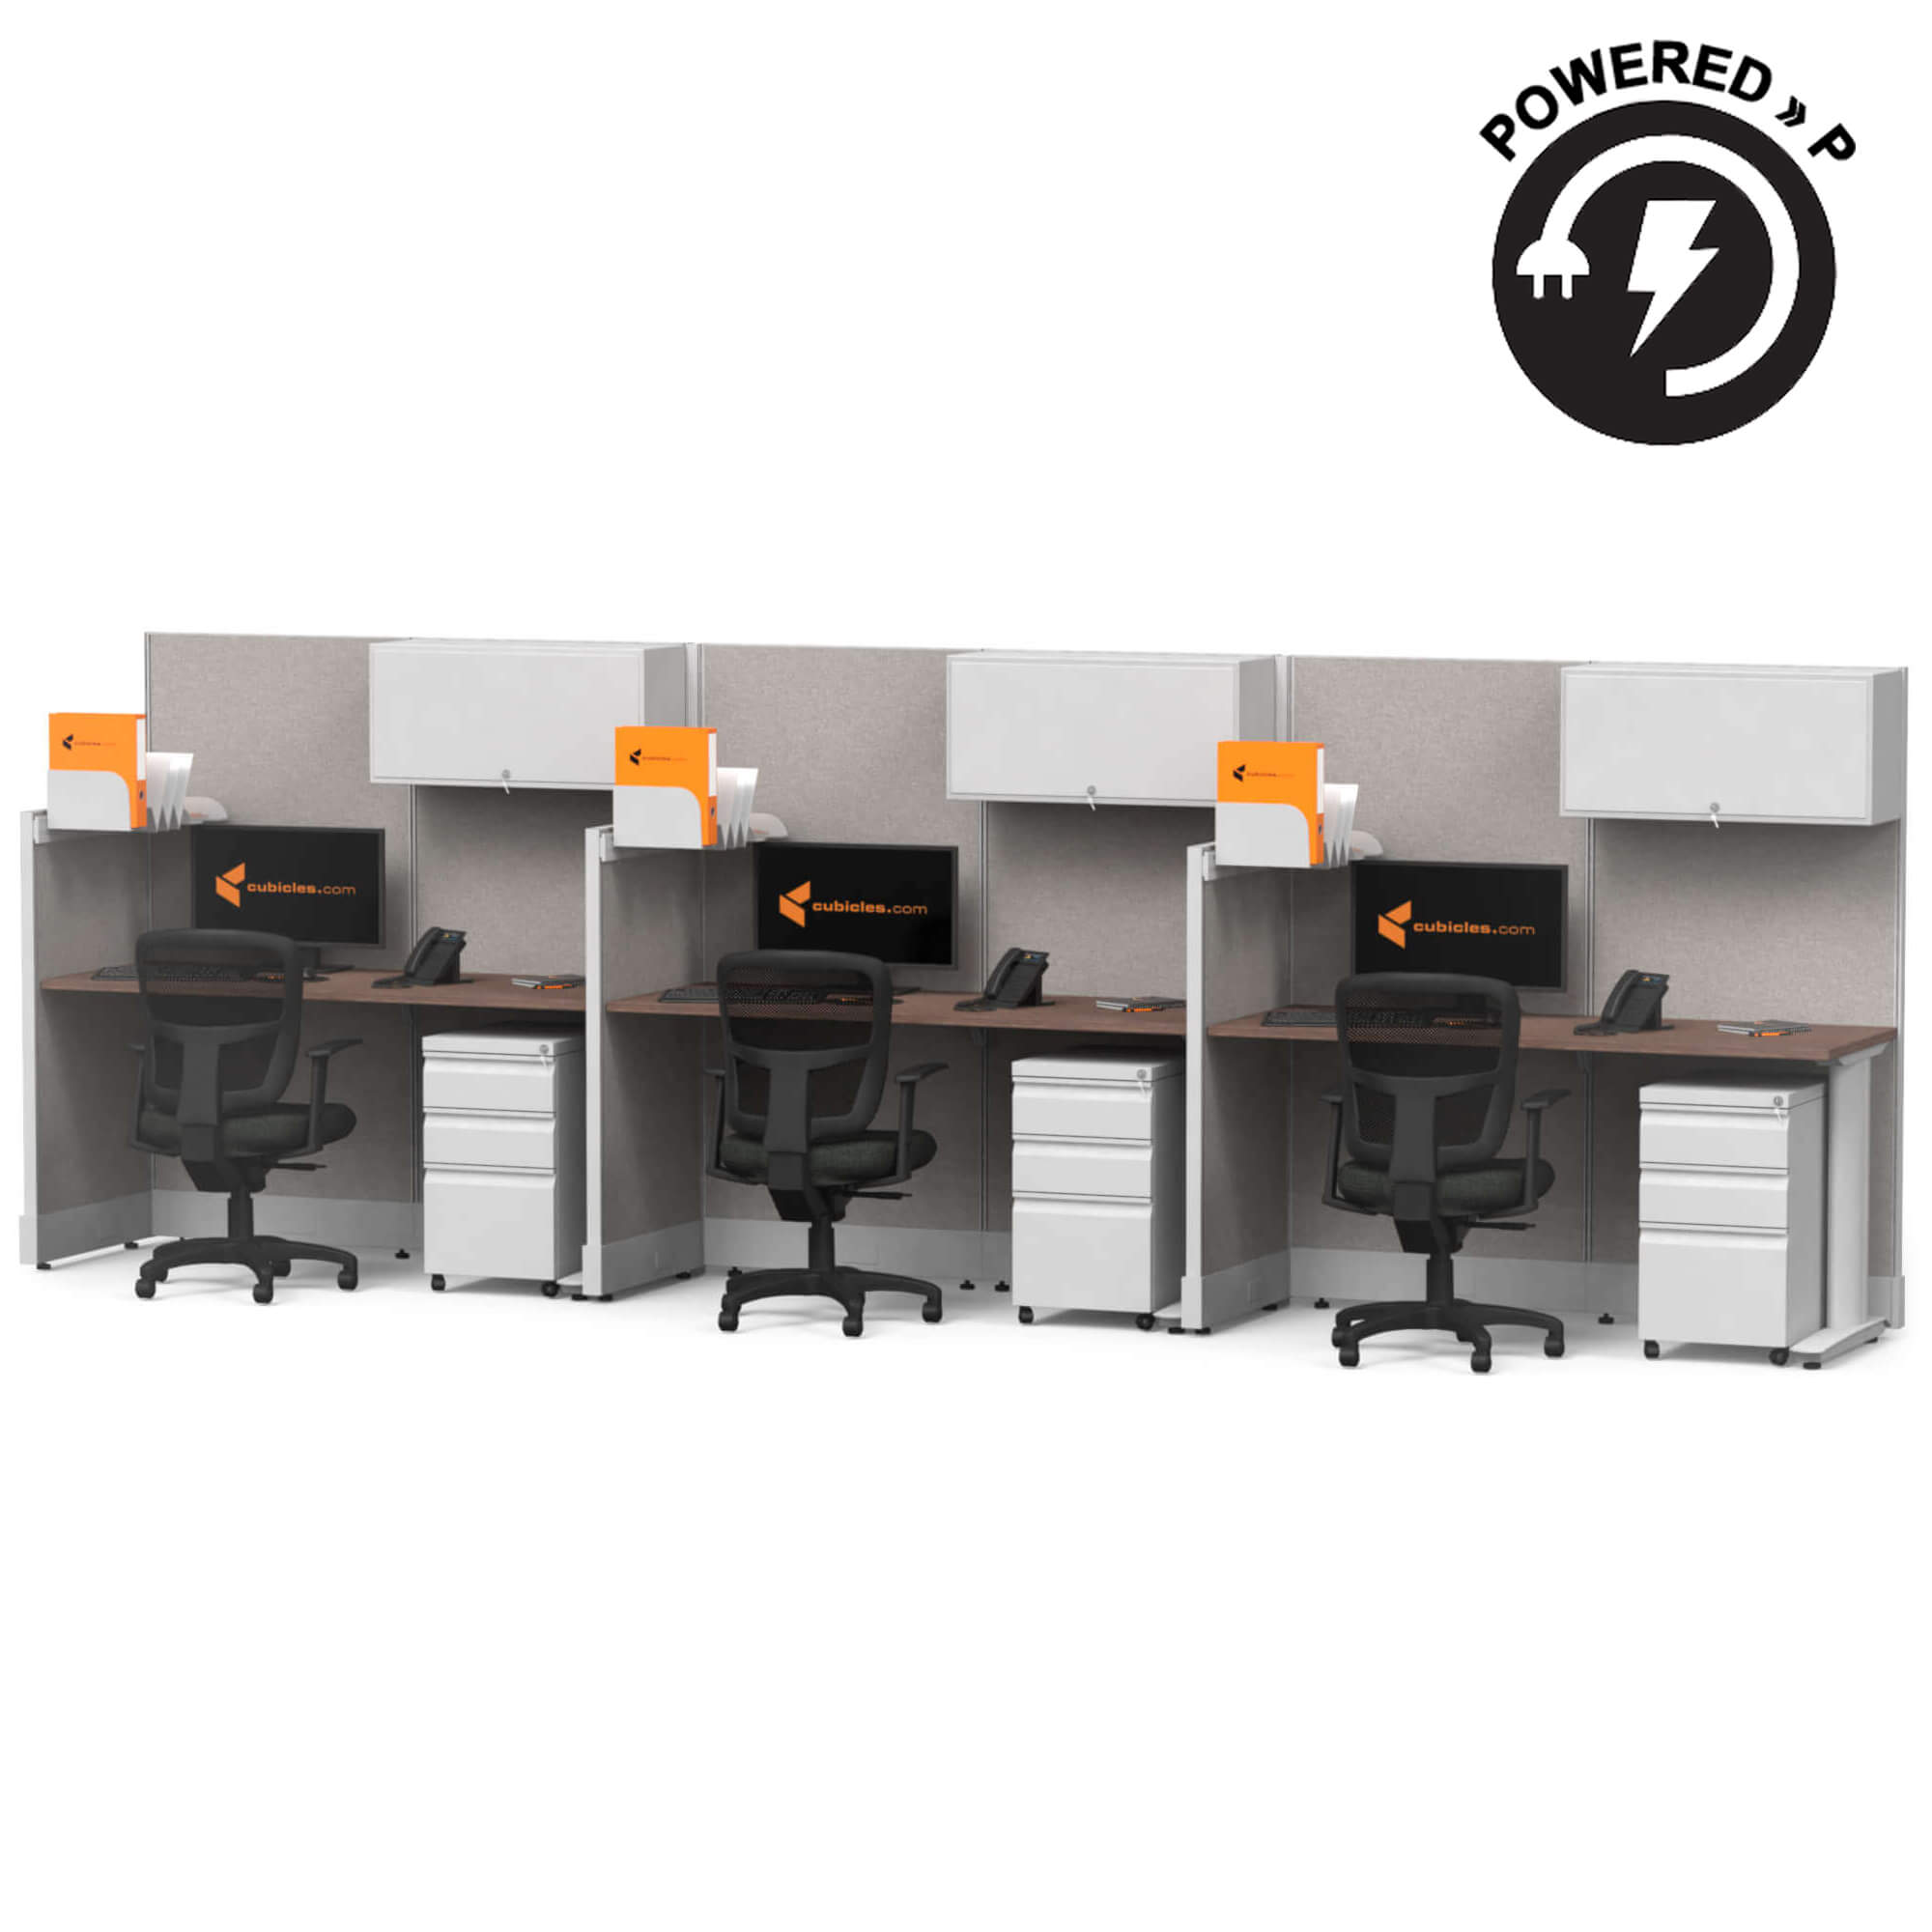 Cubicle desk straight with storage 3pack powered